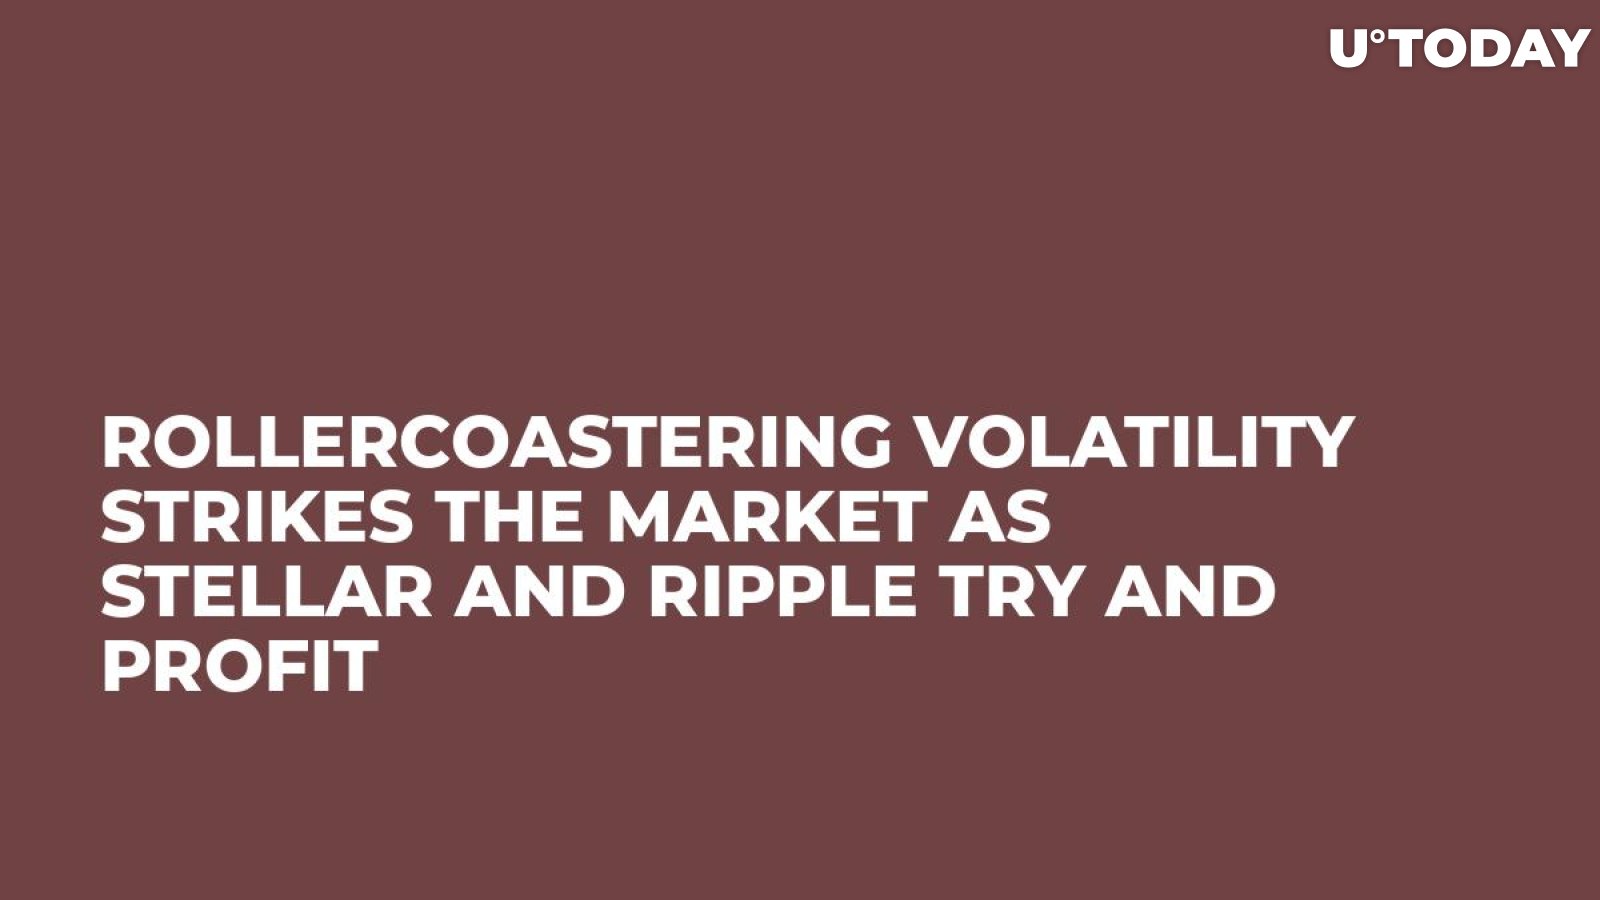 Rollercoastering Volatility Strikes the Market as Stellar and Ripple Try and Profit